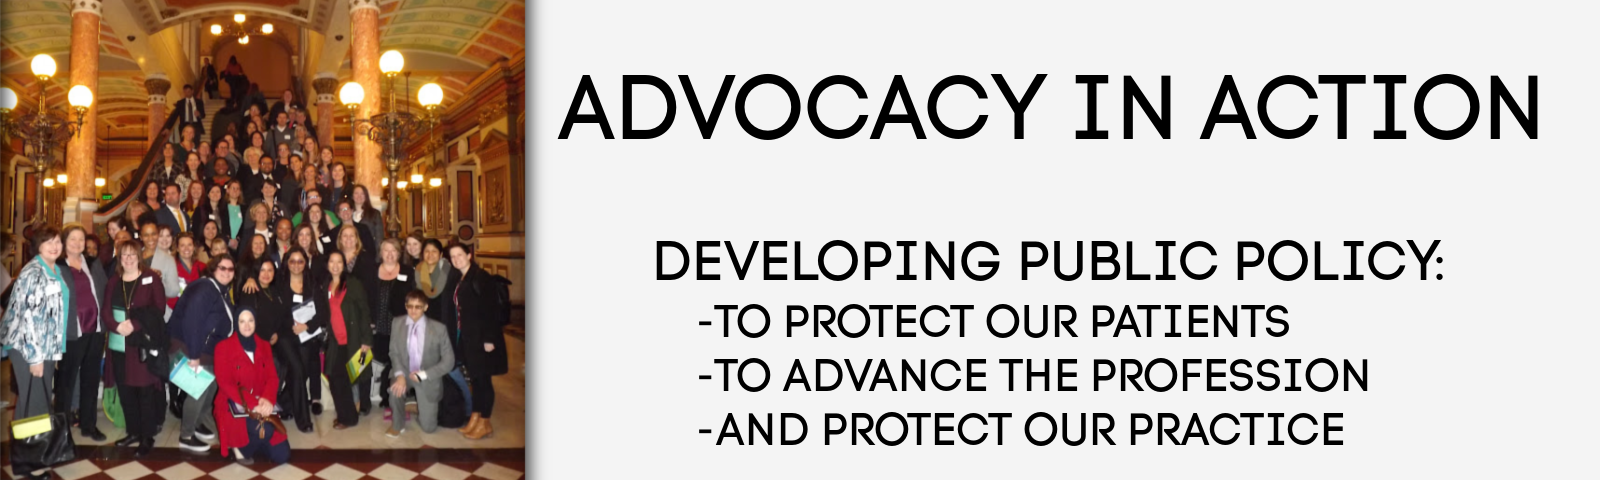 Advocacy in Action: Developing policy to protect our patients, advance the profession ad protect our practice